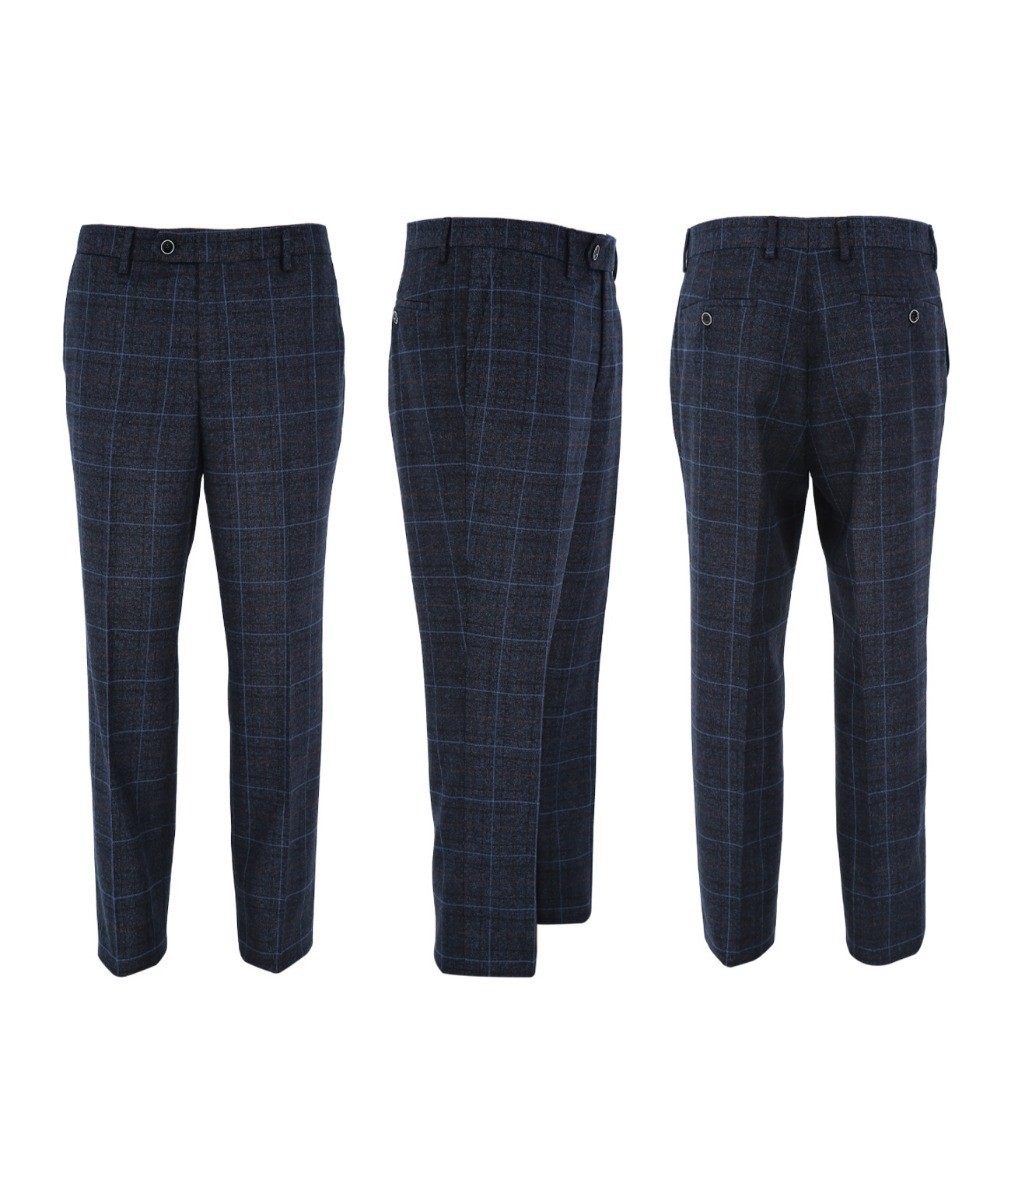 Men's Tailored Fit Retro Check Pants - ANTHONY NAVY